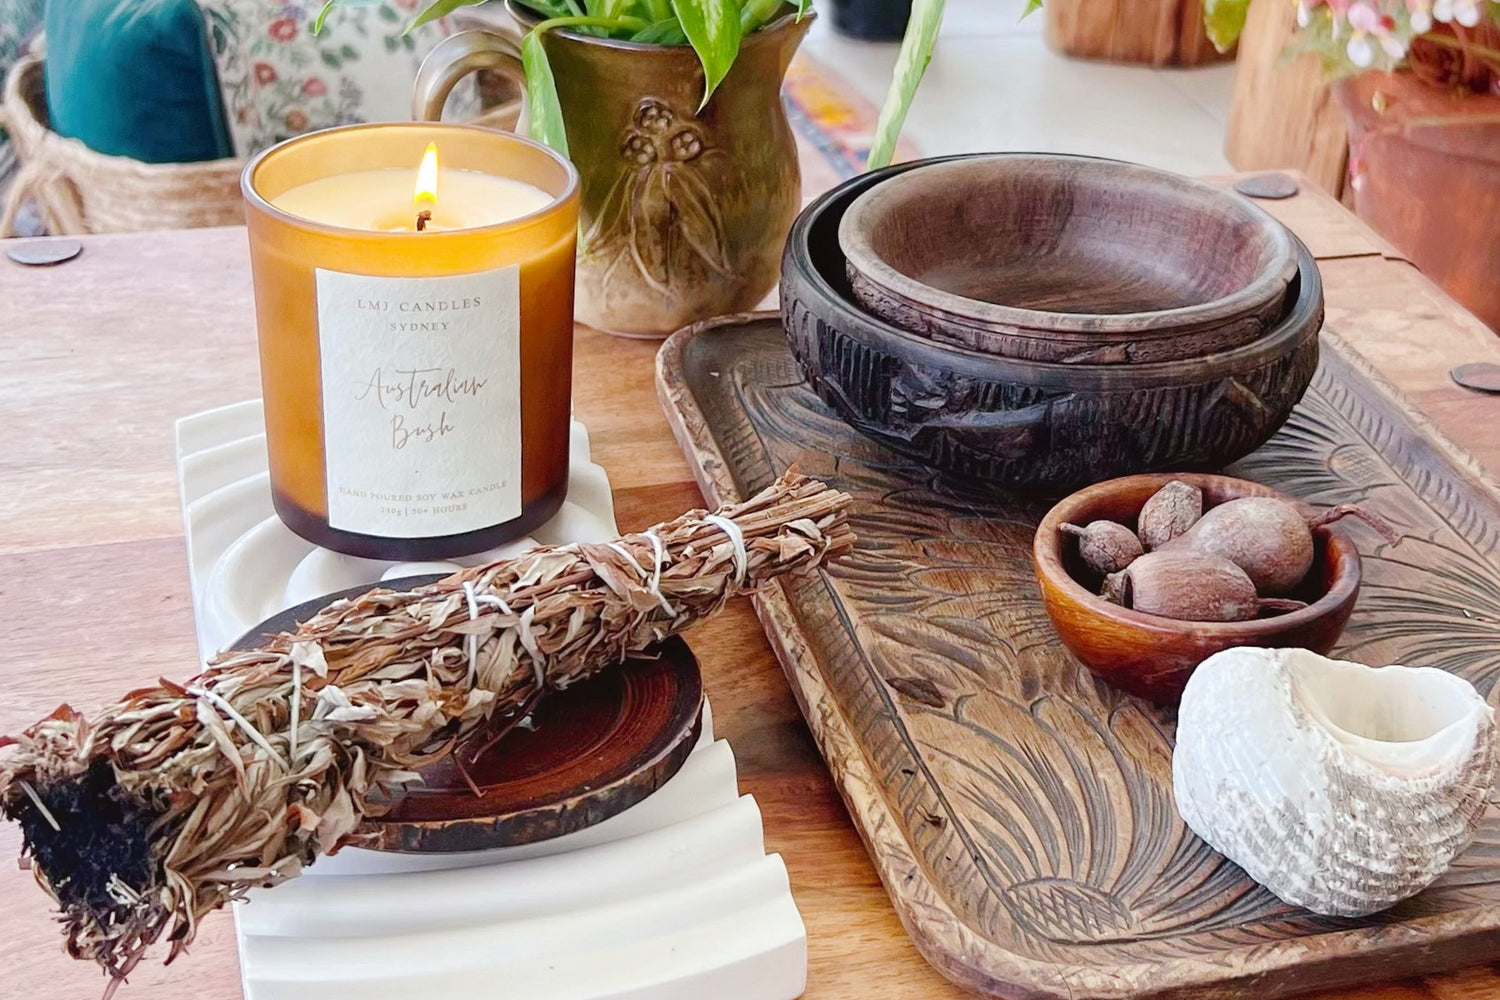 Relaxing Atmosphere, Scented Soy Wax Candle Australia, Home Cleansing, LMJ Candles